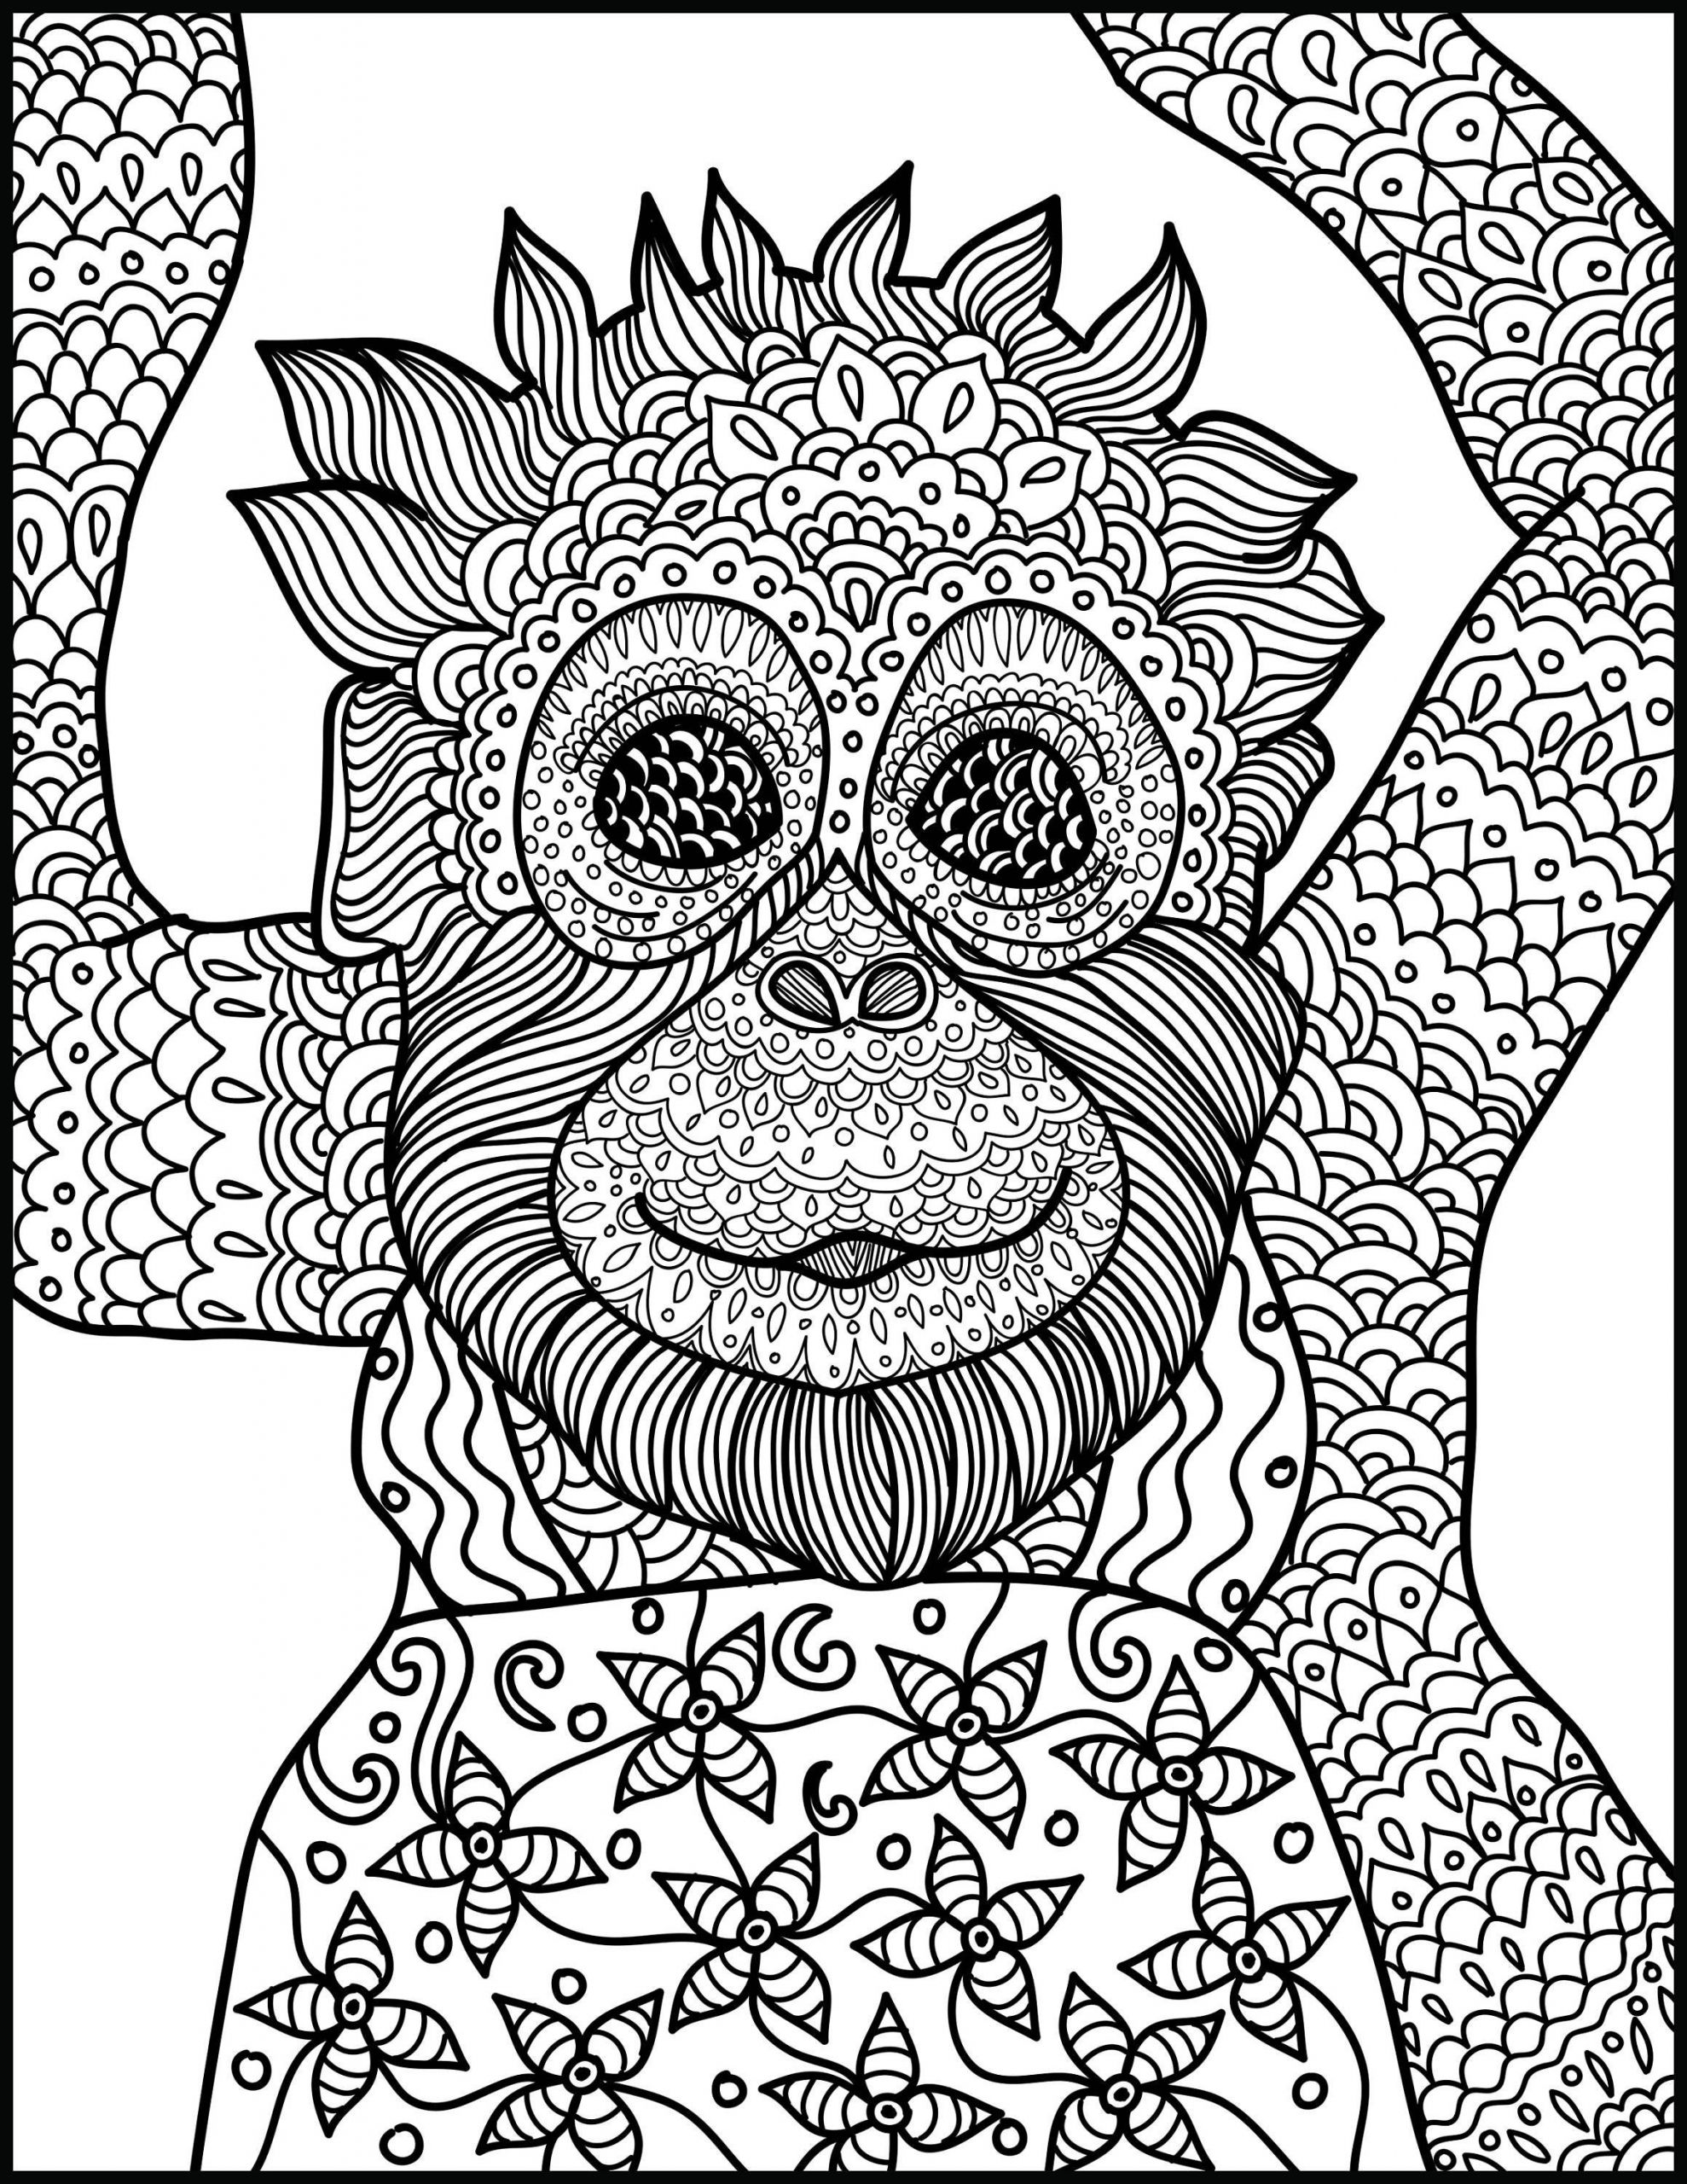 Adult Coloring Books Animals
 Animal Coloring Page Monkey Printable Adult Coloring Page